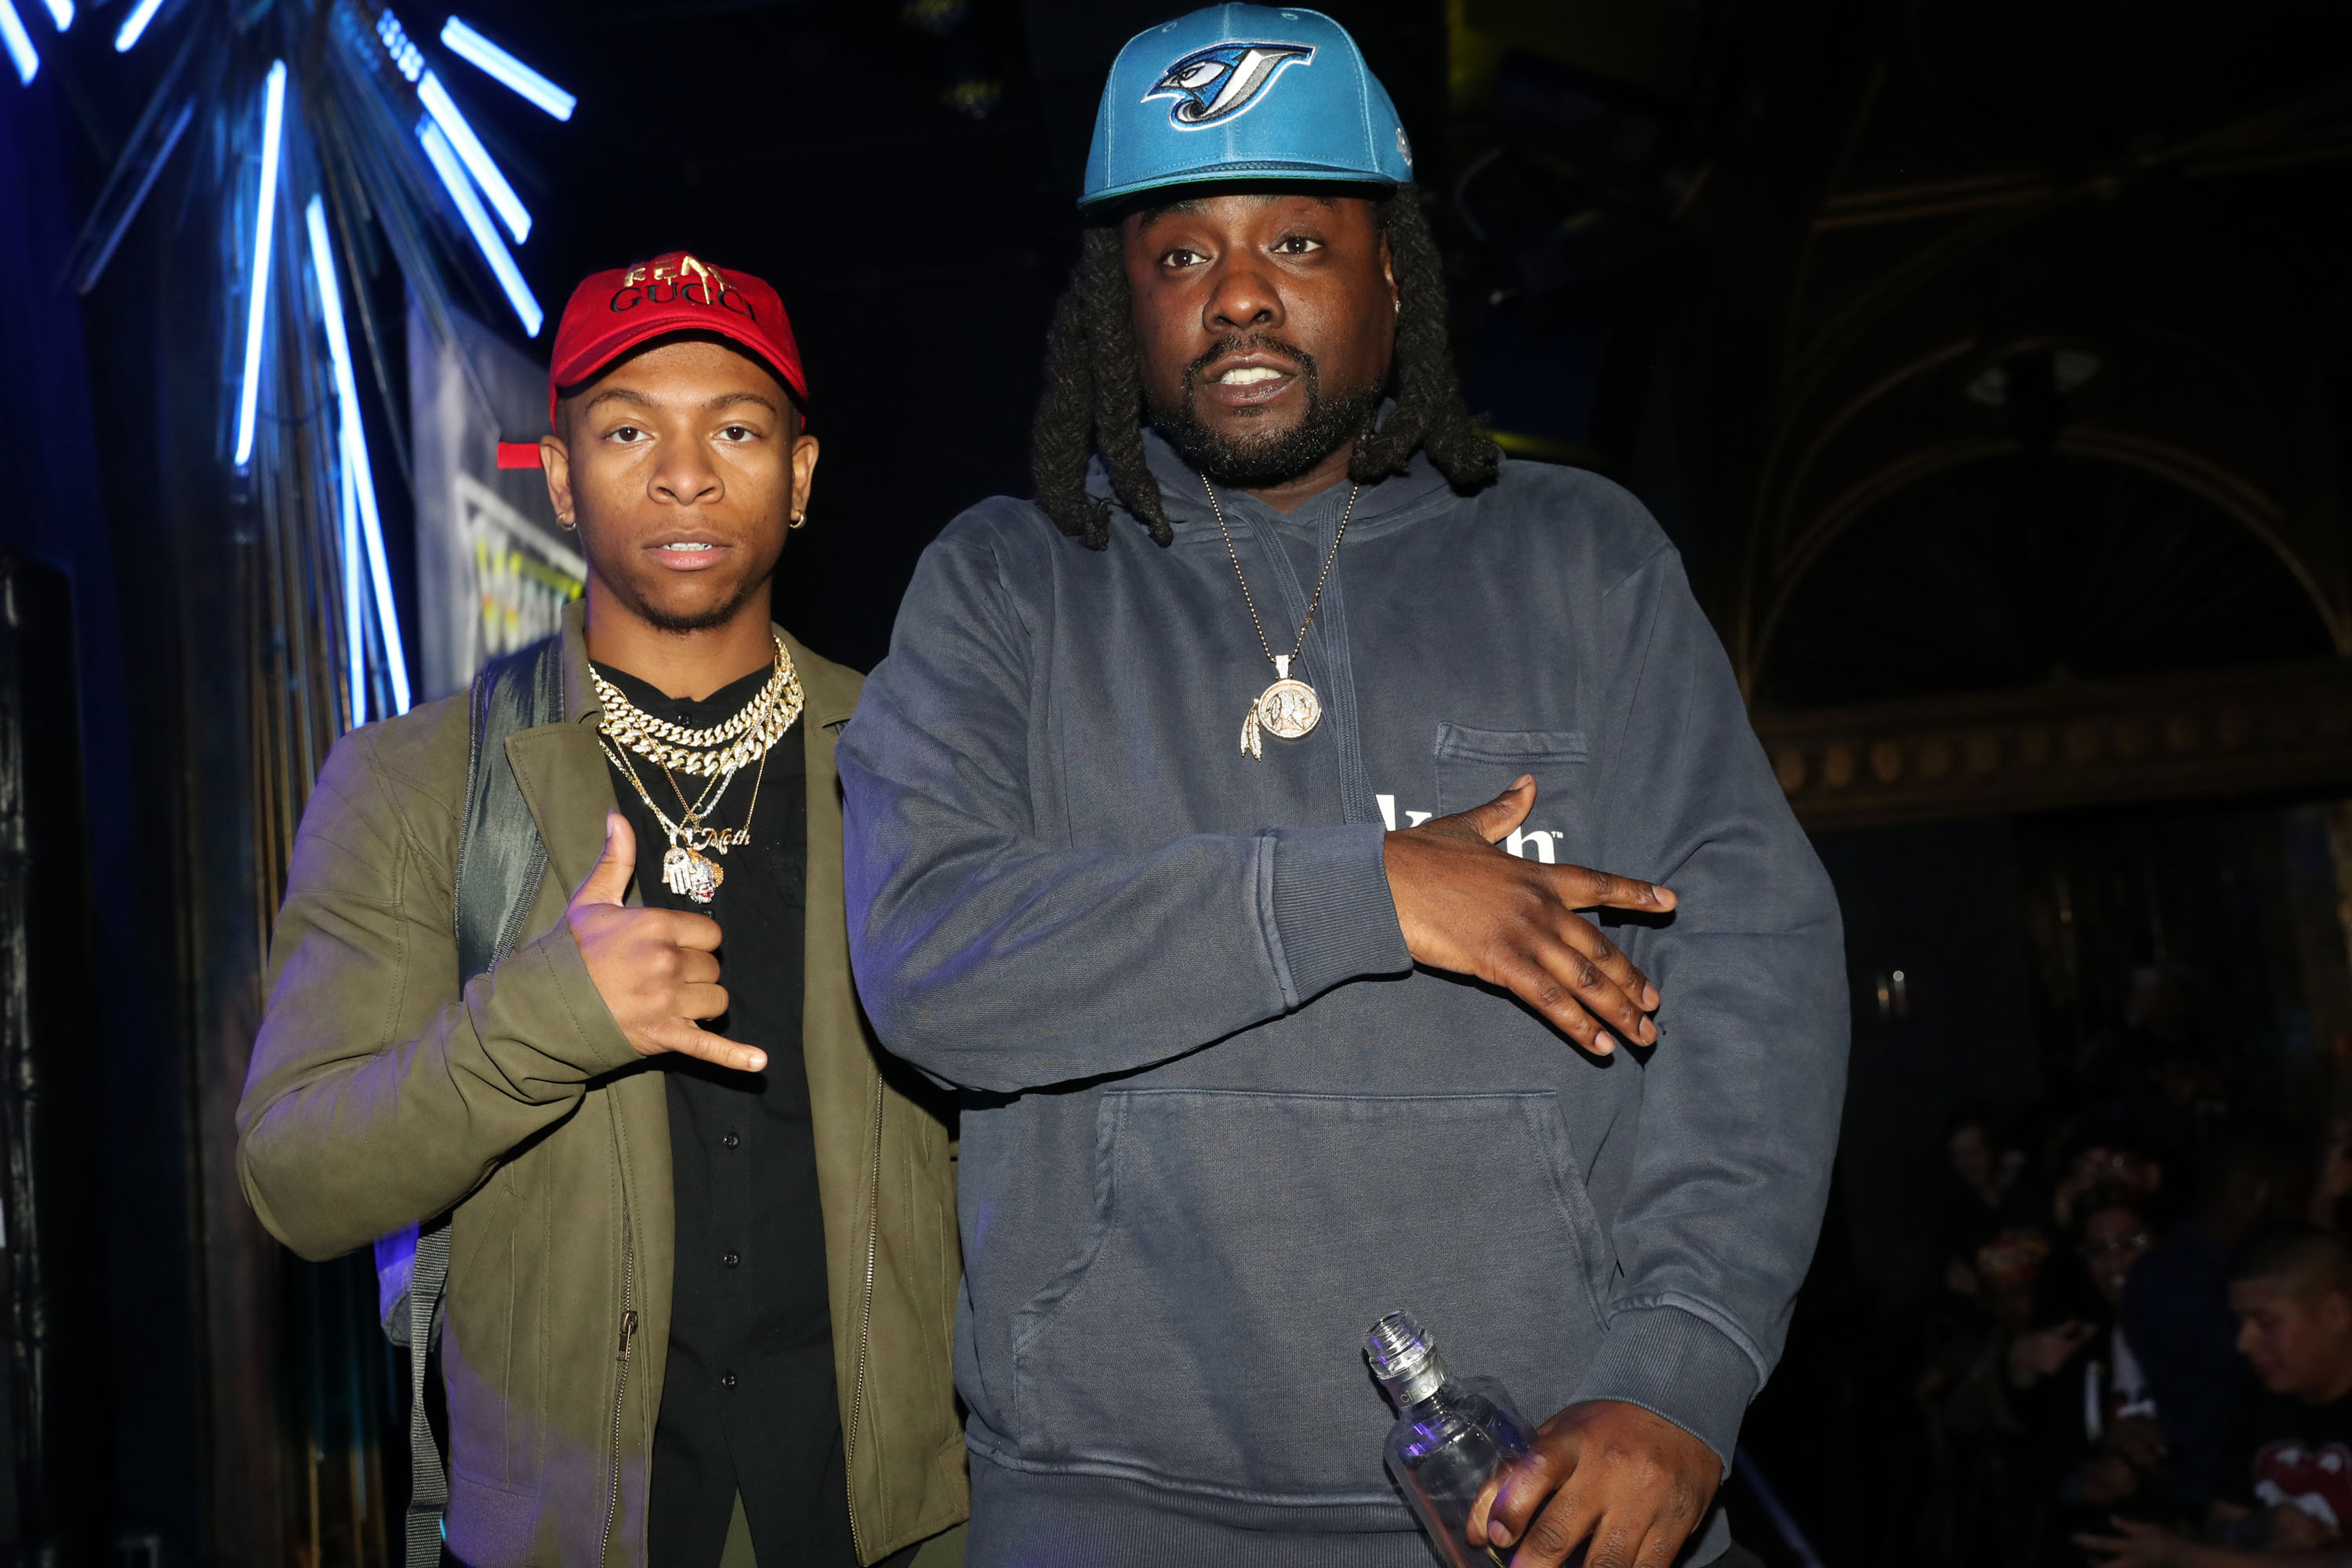 Lio Rush (L) and Wale attend Wale's 5th Annual WaleMania